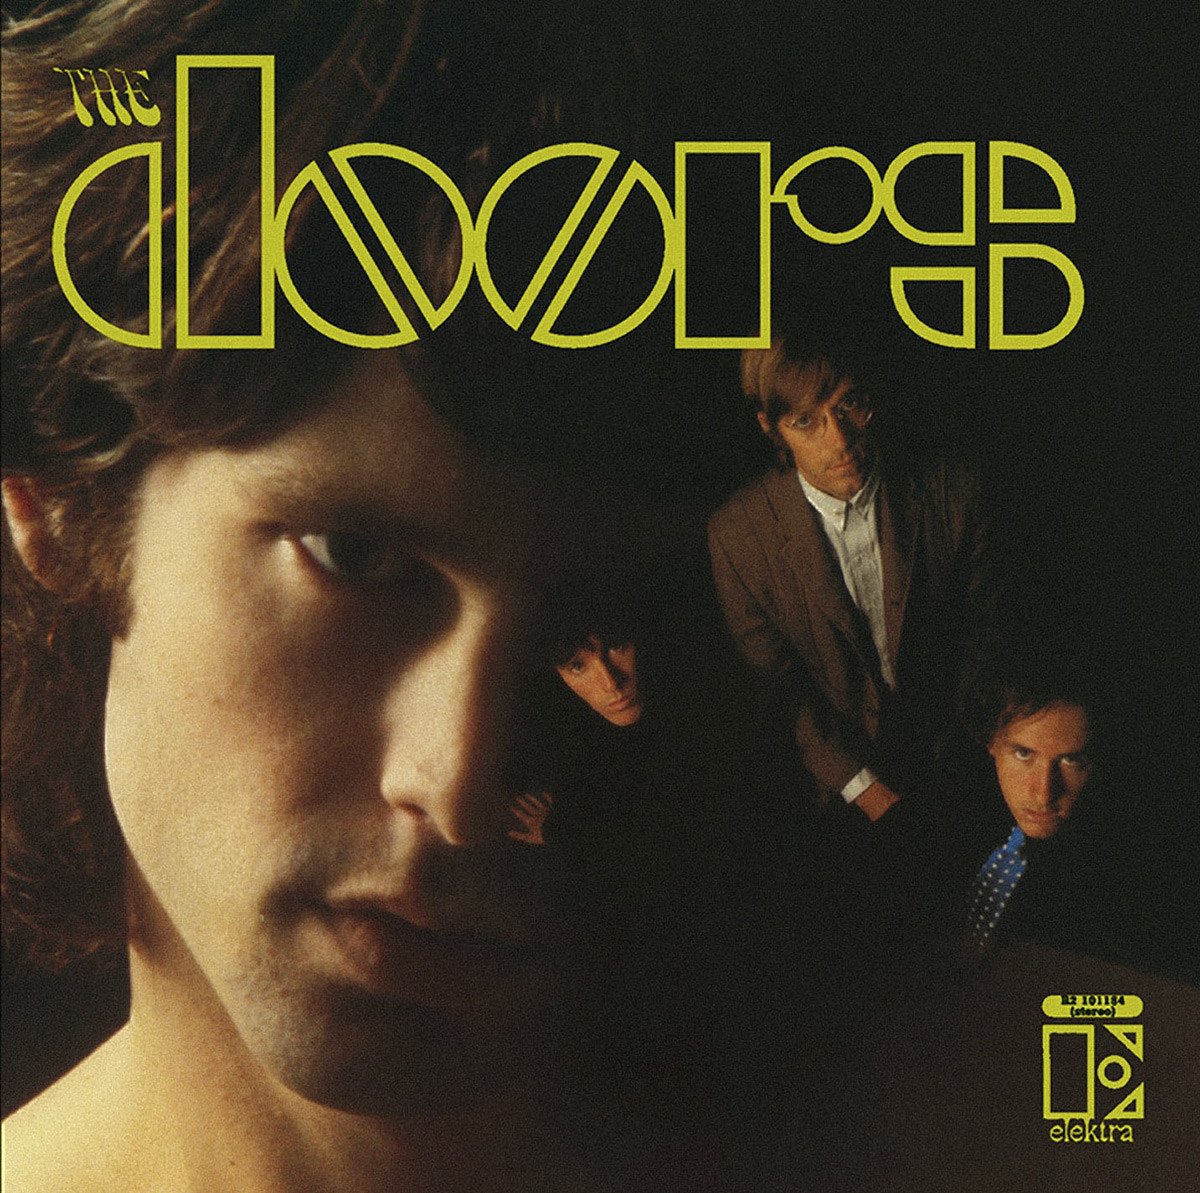 A Collection (The Doors album) - Wikipedia